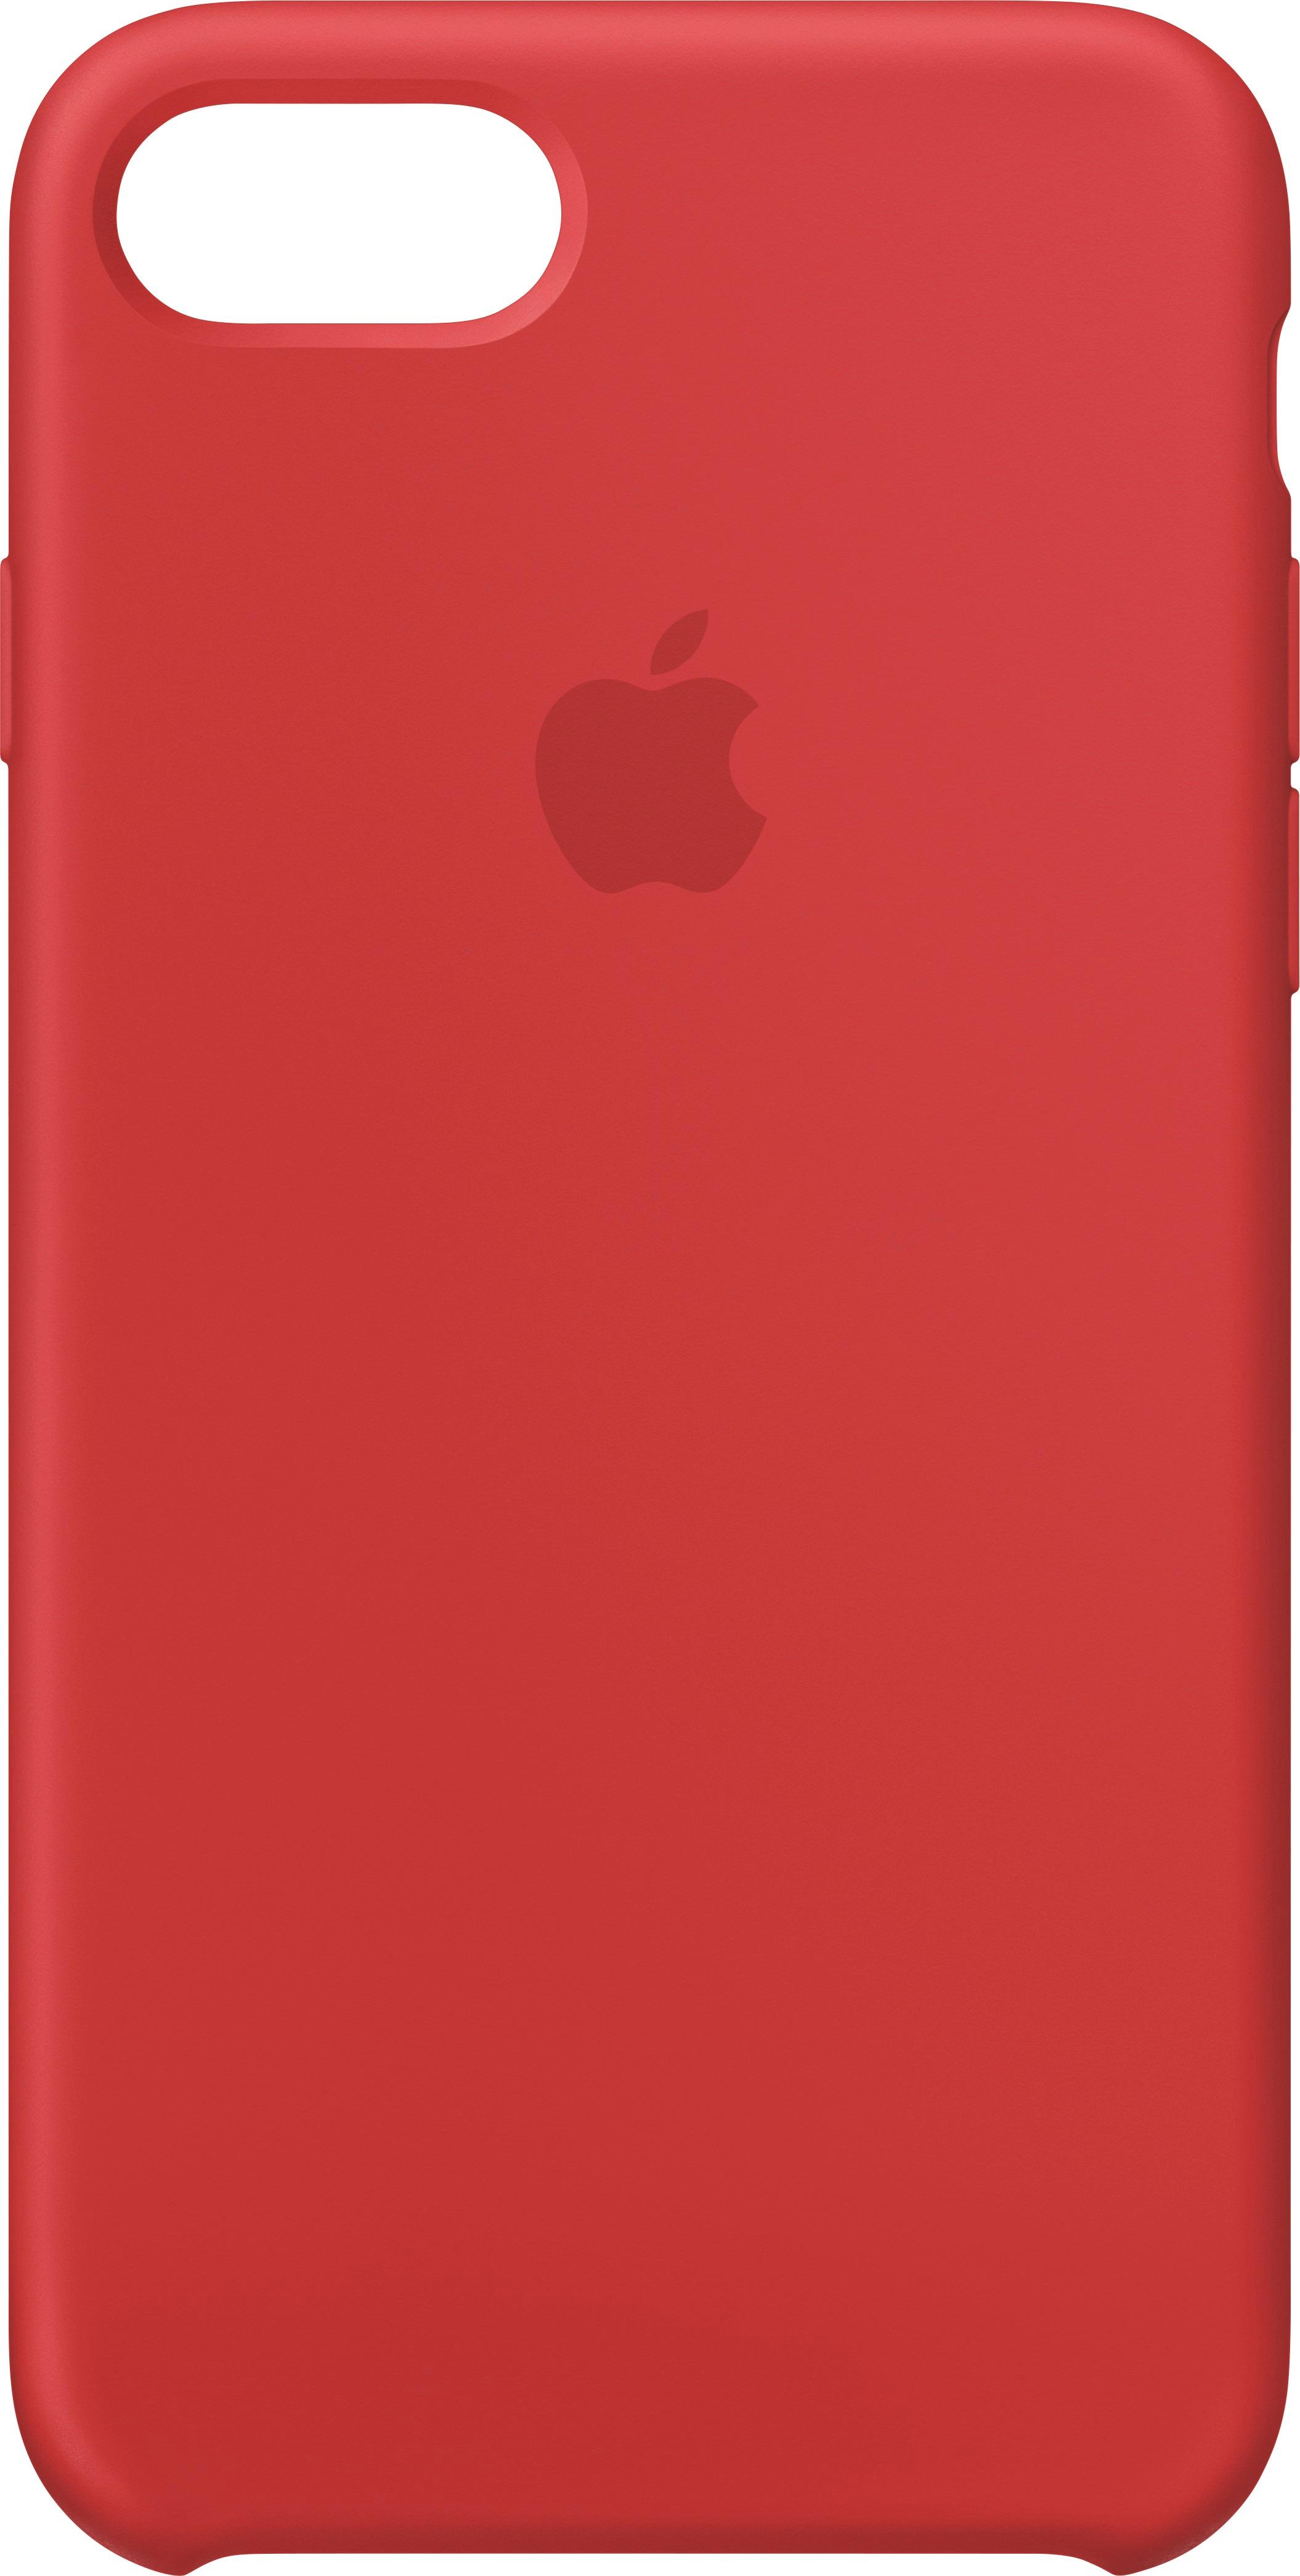 Apple iPhone® 8/7 Silicone Case (PRODUCT)RED - Best Buy